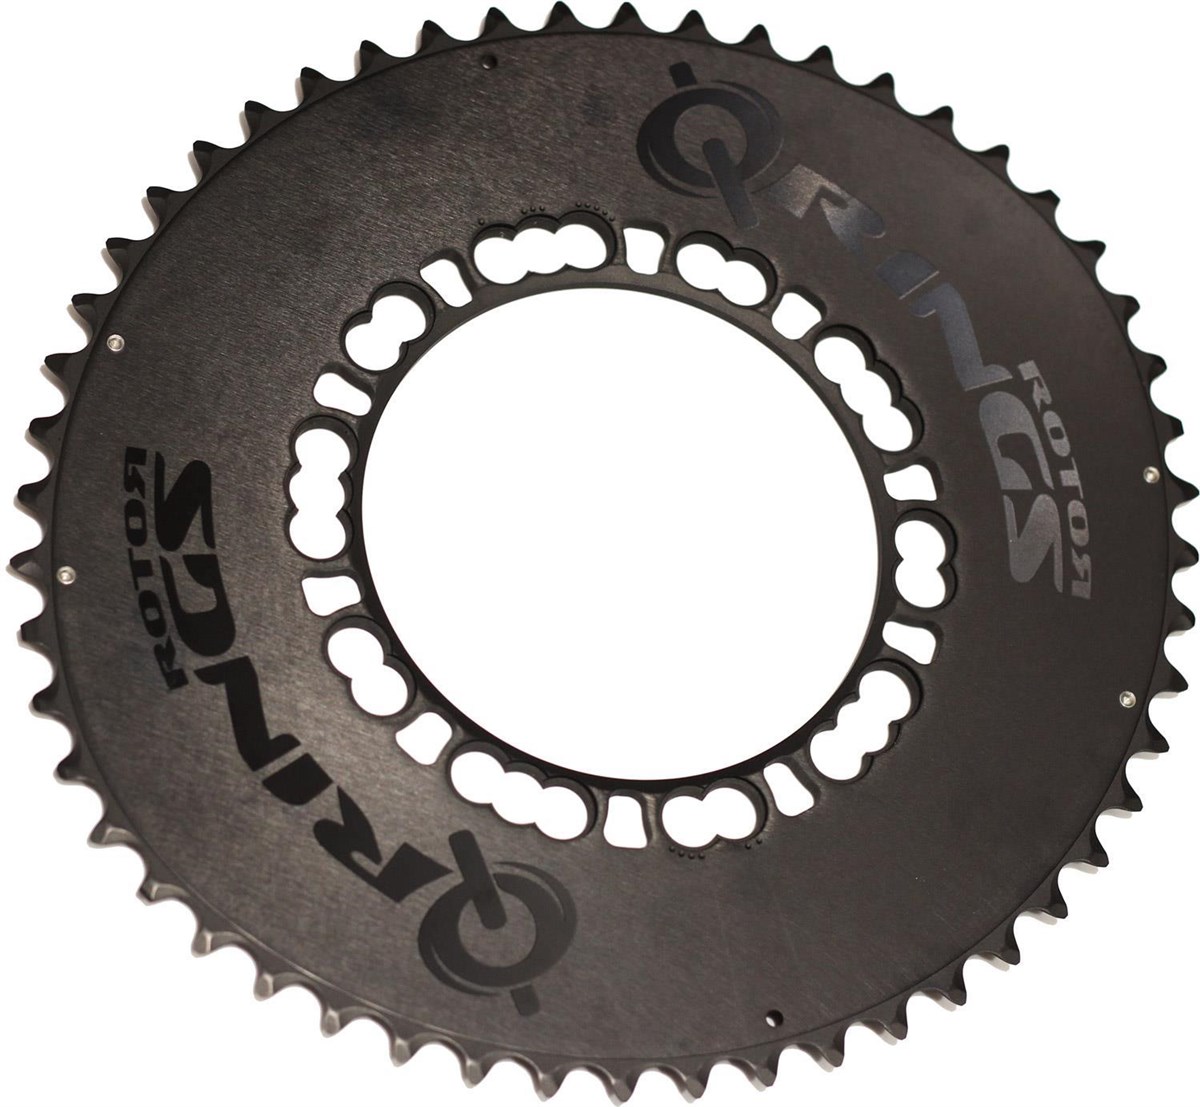 Rotor Limited Edition Q-Ring 110BCD Aero Chainrings product image